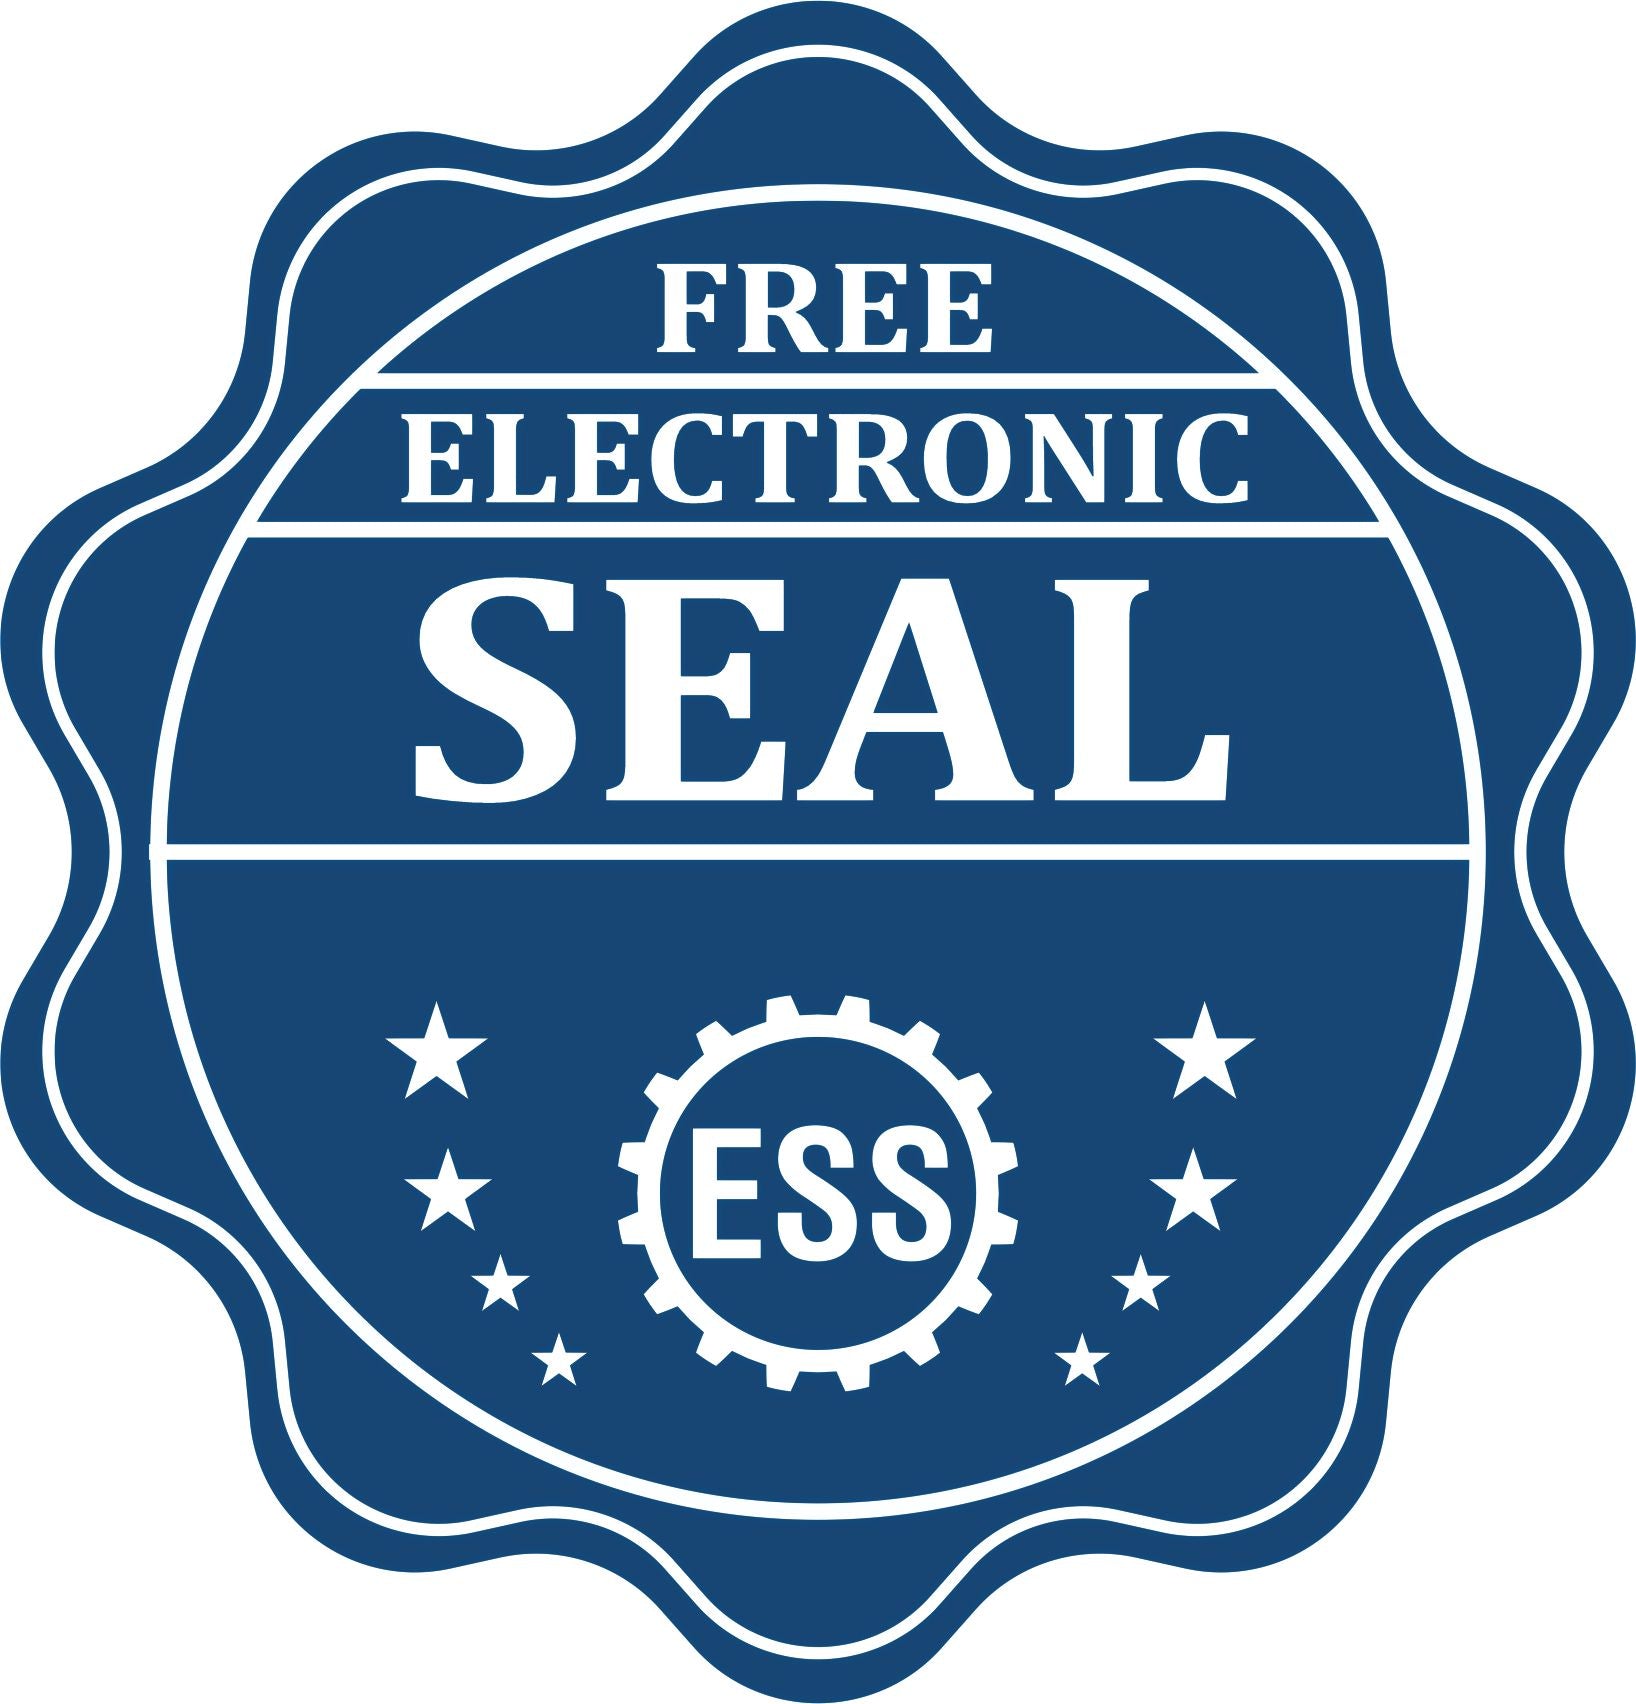 A badge showing a free electronic seal for the Premium MaxLight Pre-Inked Kentucky Engineering Stamp with stars and the ESS gear on the emblem.